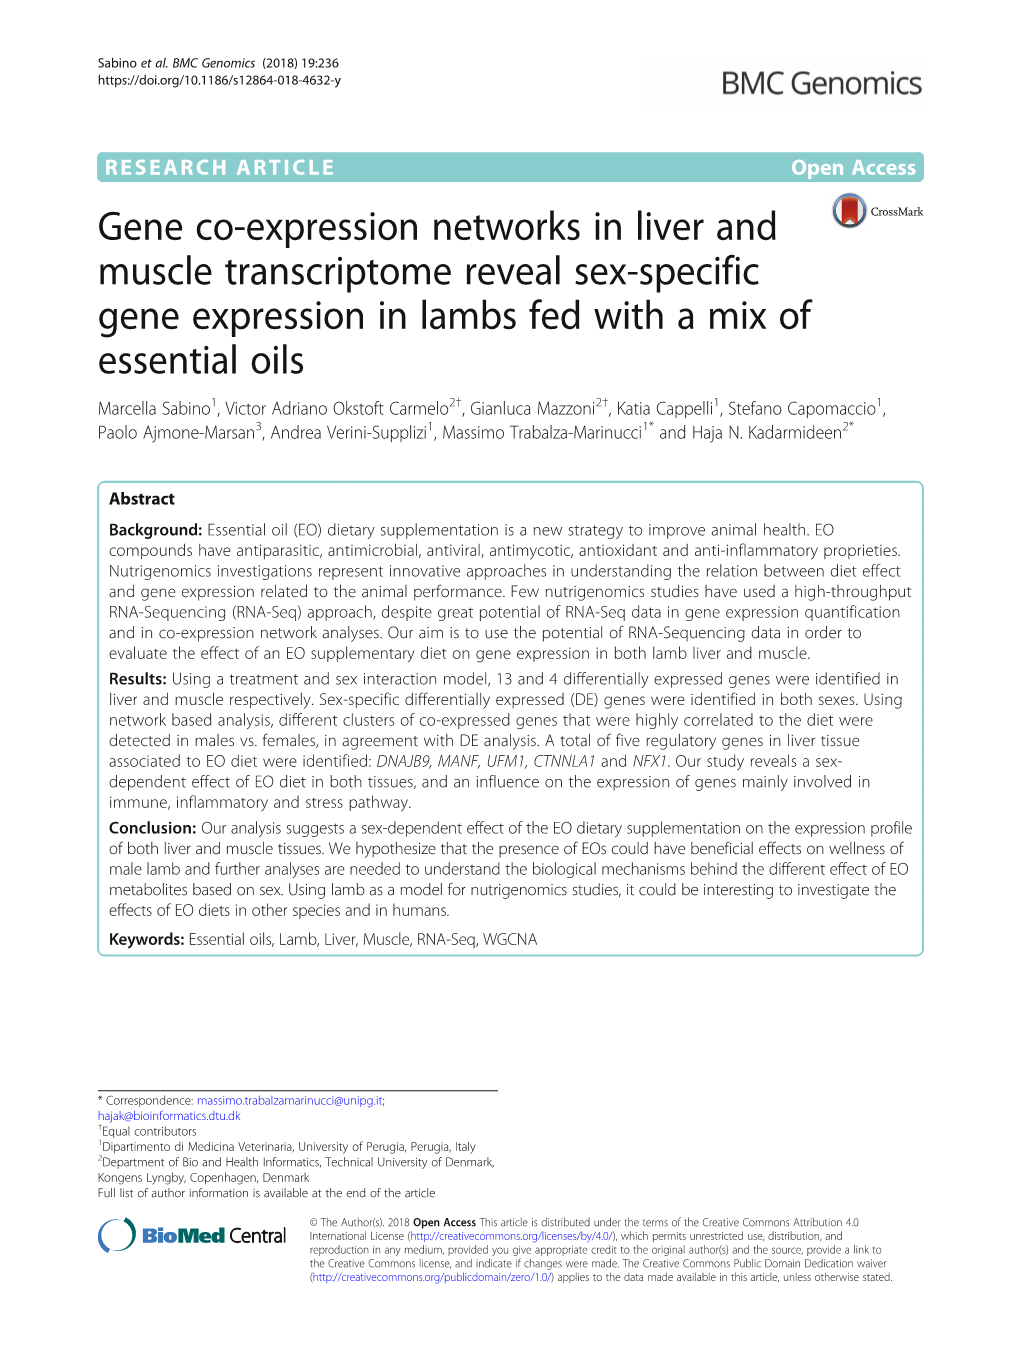 Gene Co-Expression Networks in Liver and Muscle Transcriptome Reveal